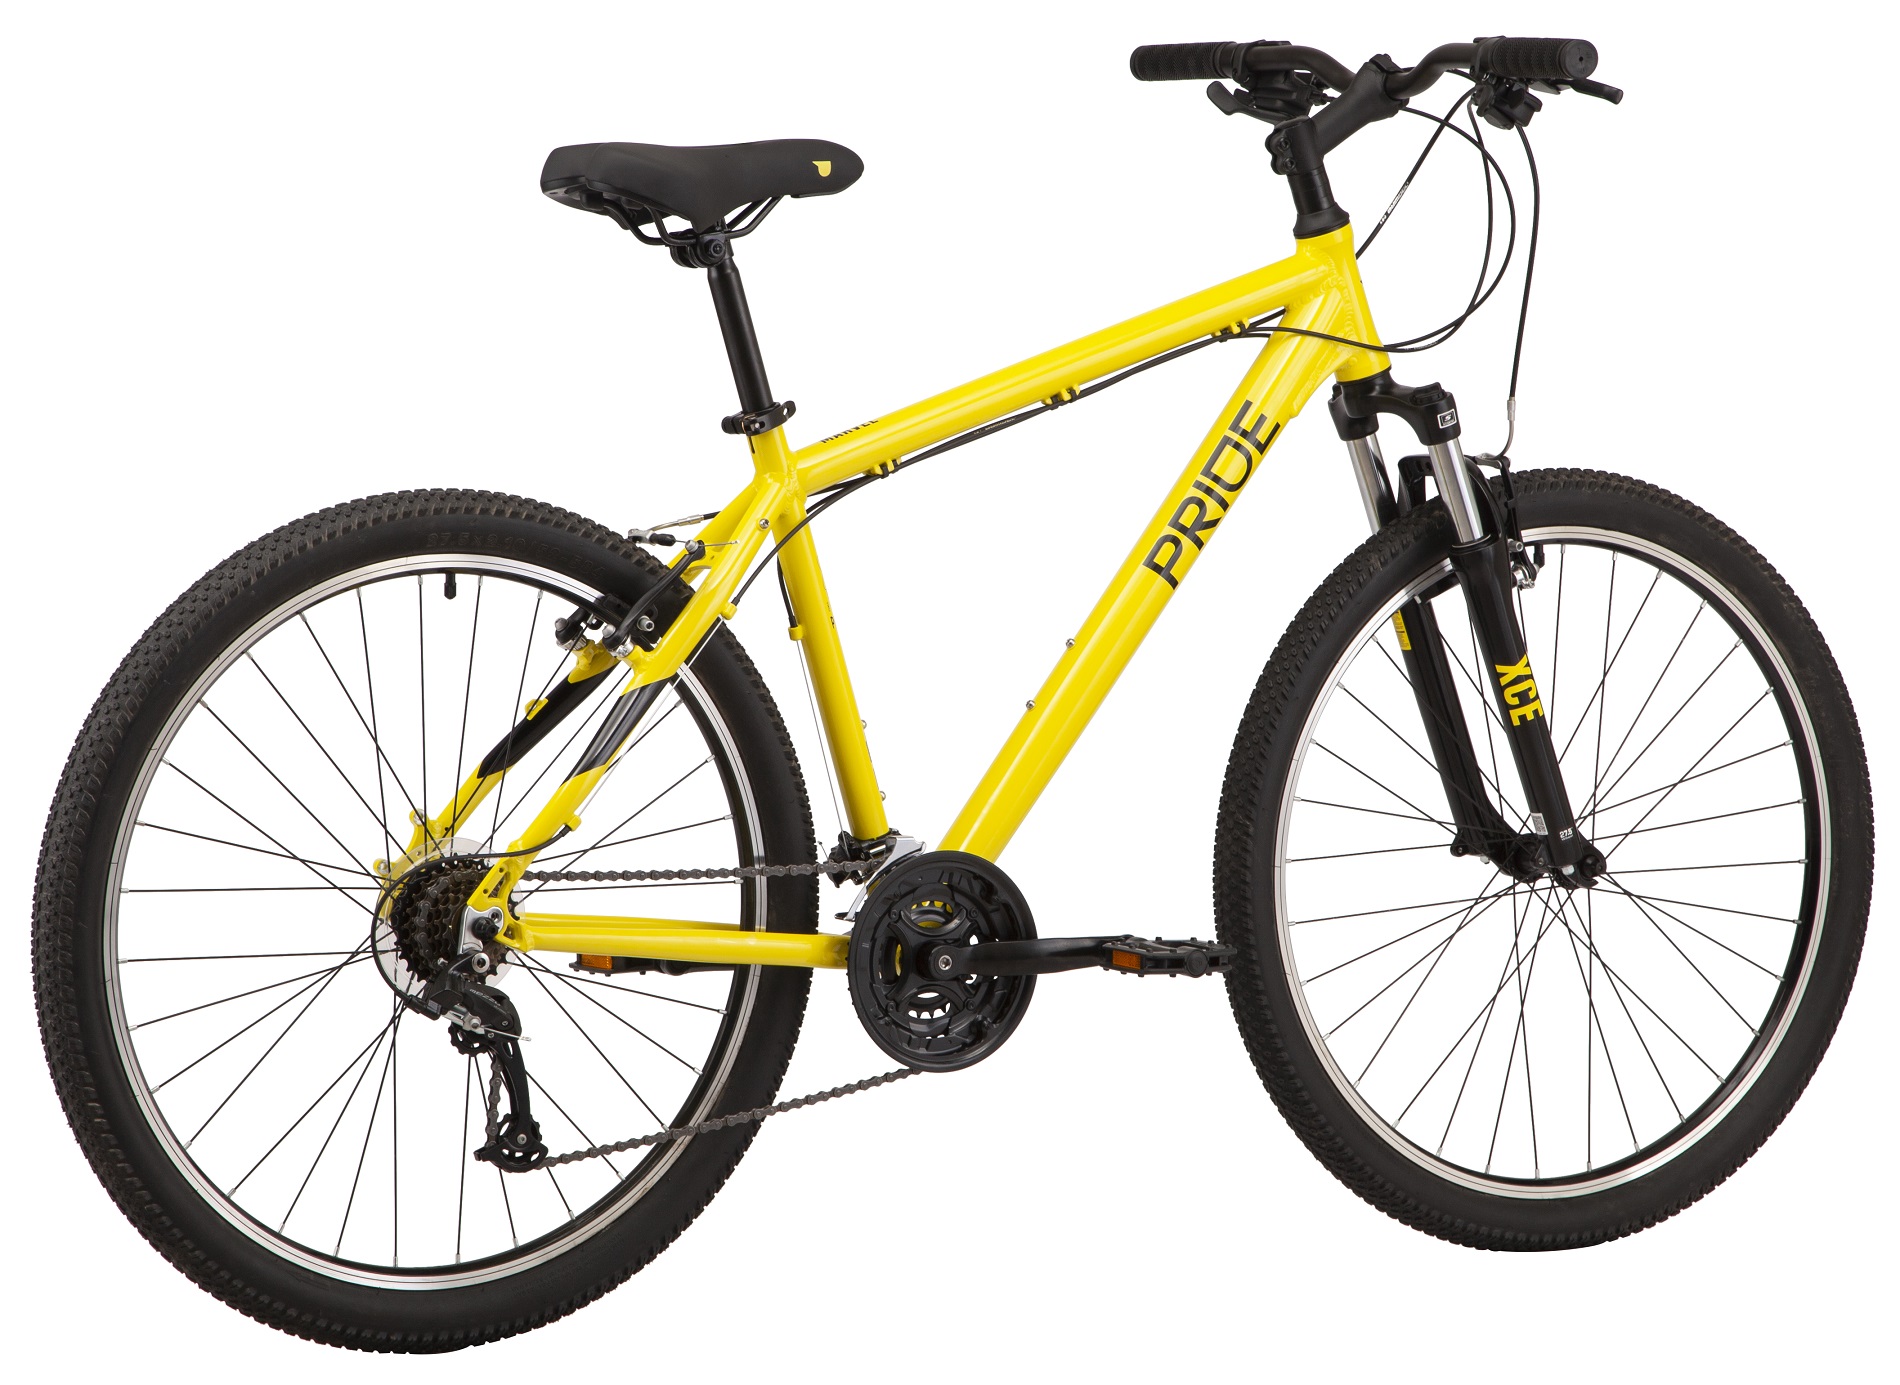 27.5" PRIDE MARVEL 7.1 frame - M 2022 Yellow (rear and front switches and tamnet - Microshift) Photo 3